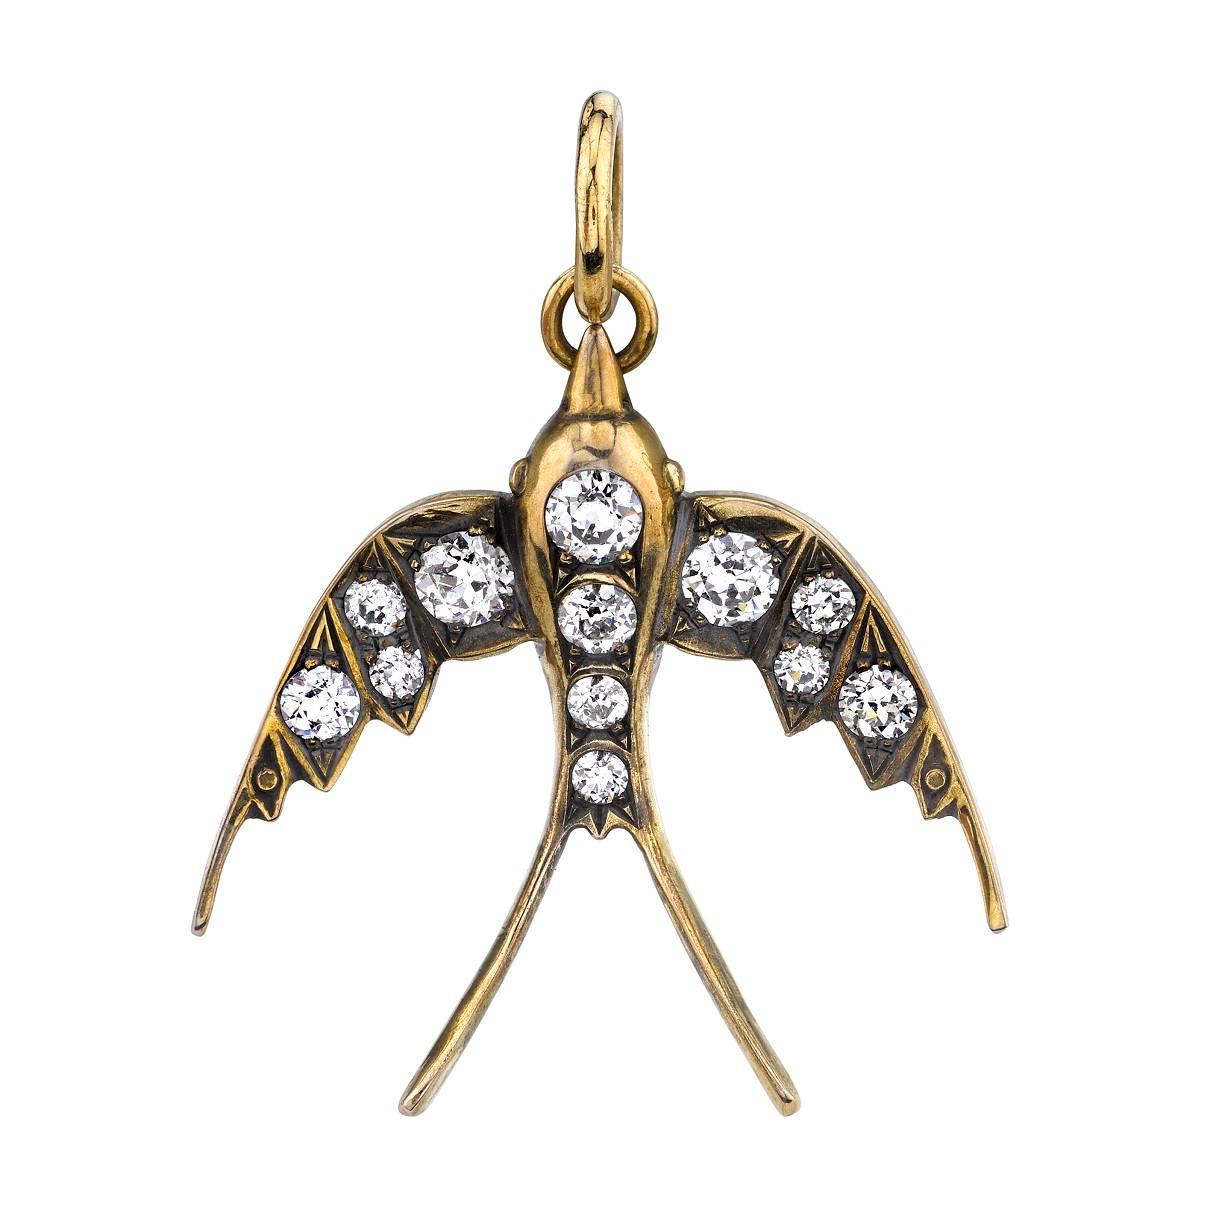 0.89ctw old European cut diamonds set in a handcrafted 18k yellow and white gold Swallow charm.  Includes 24